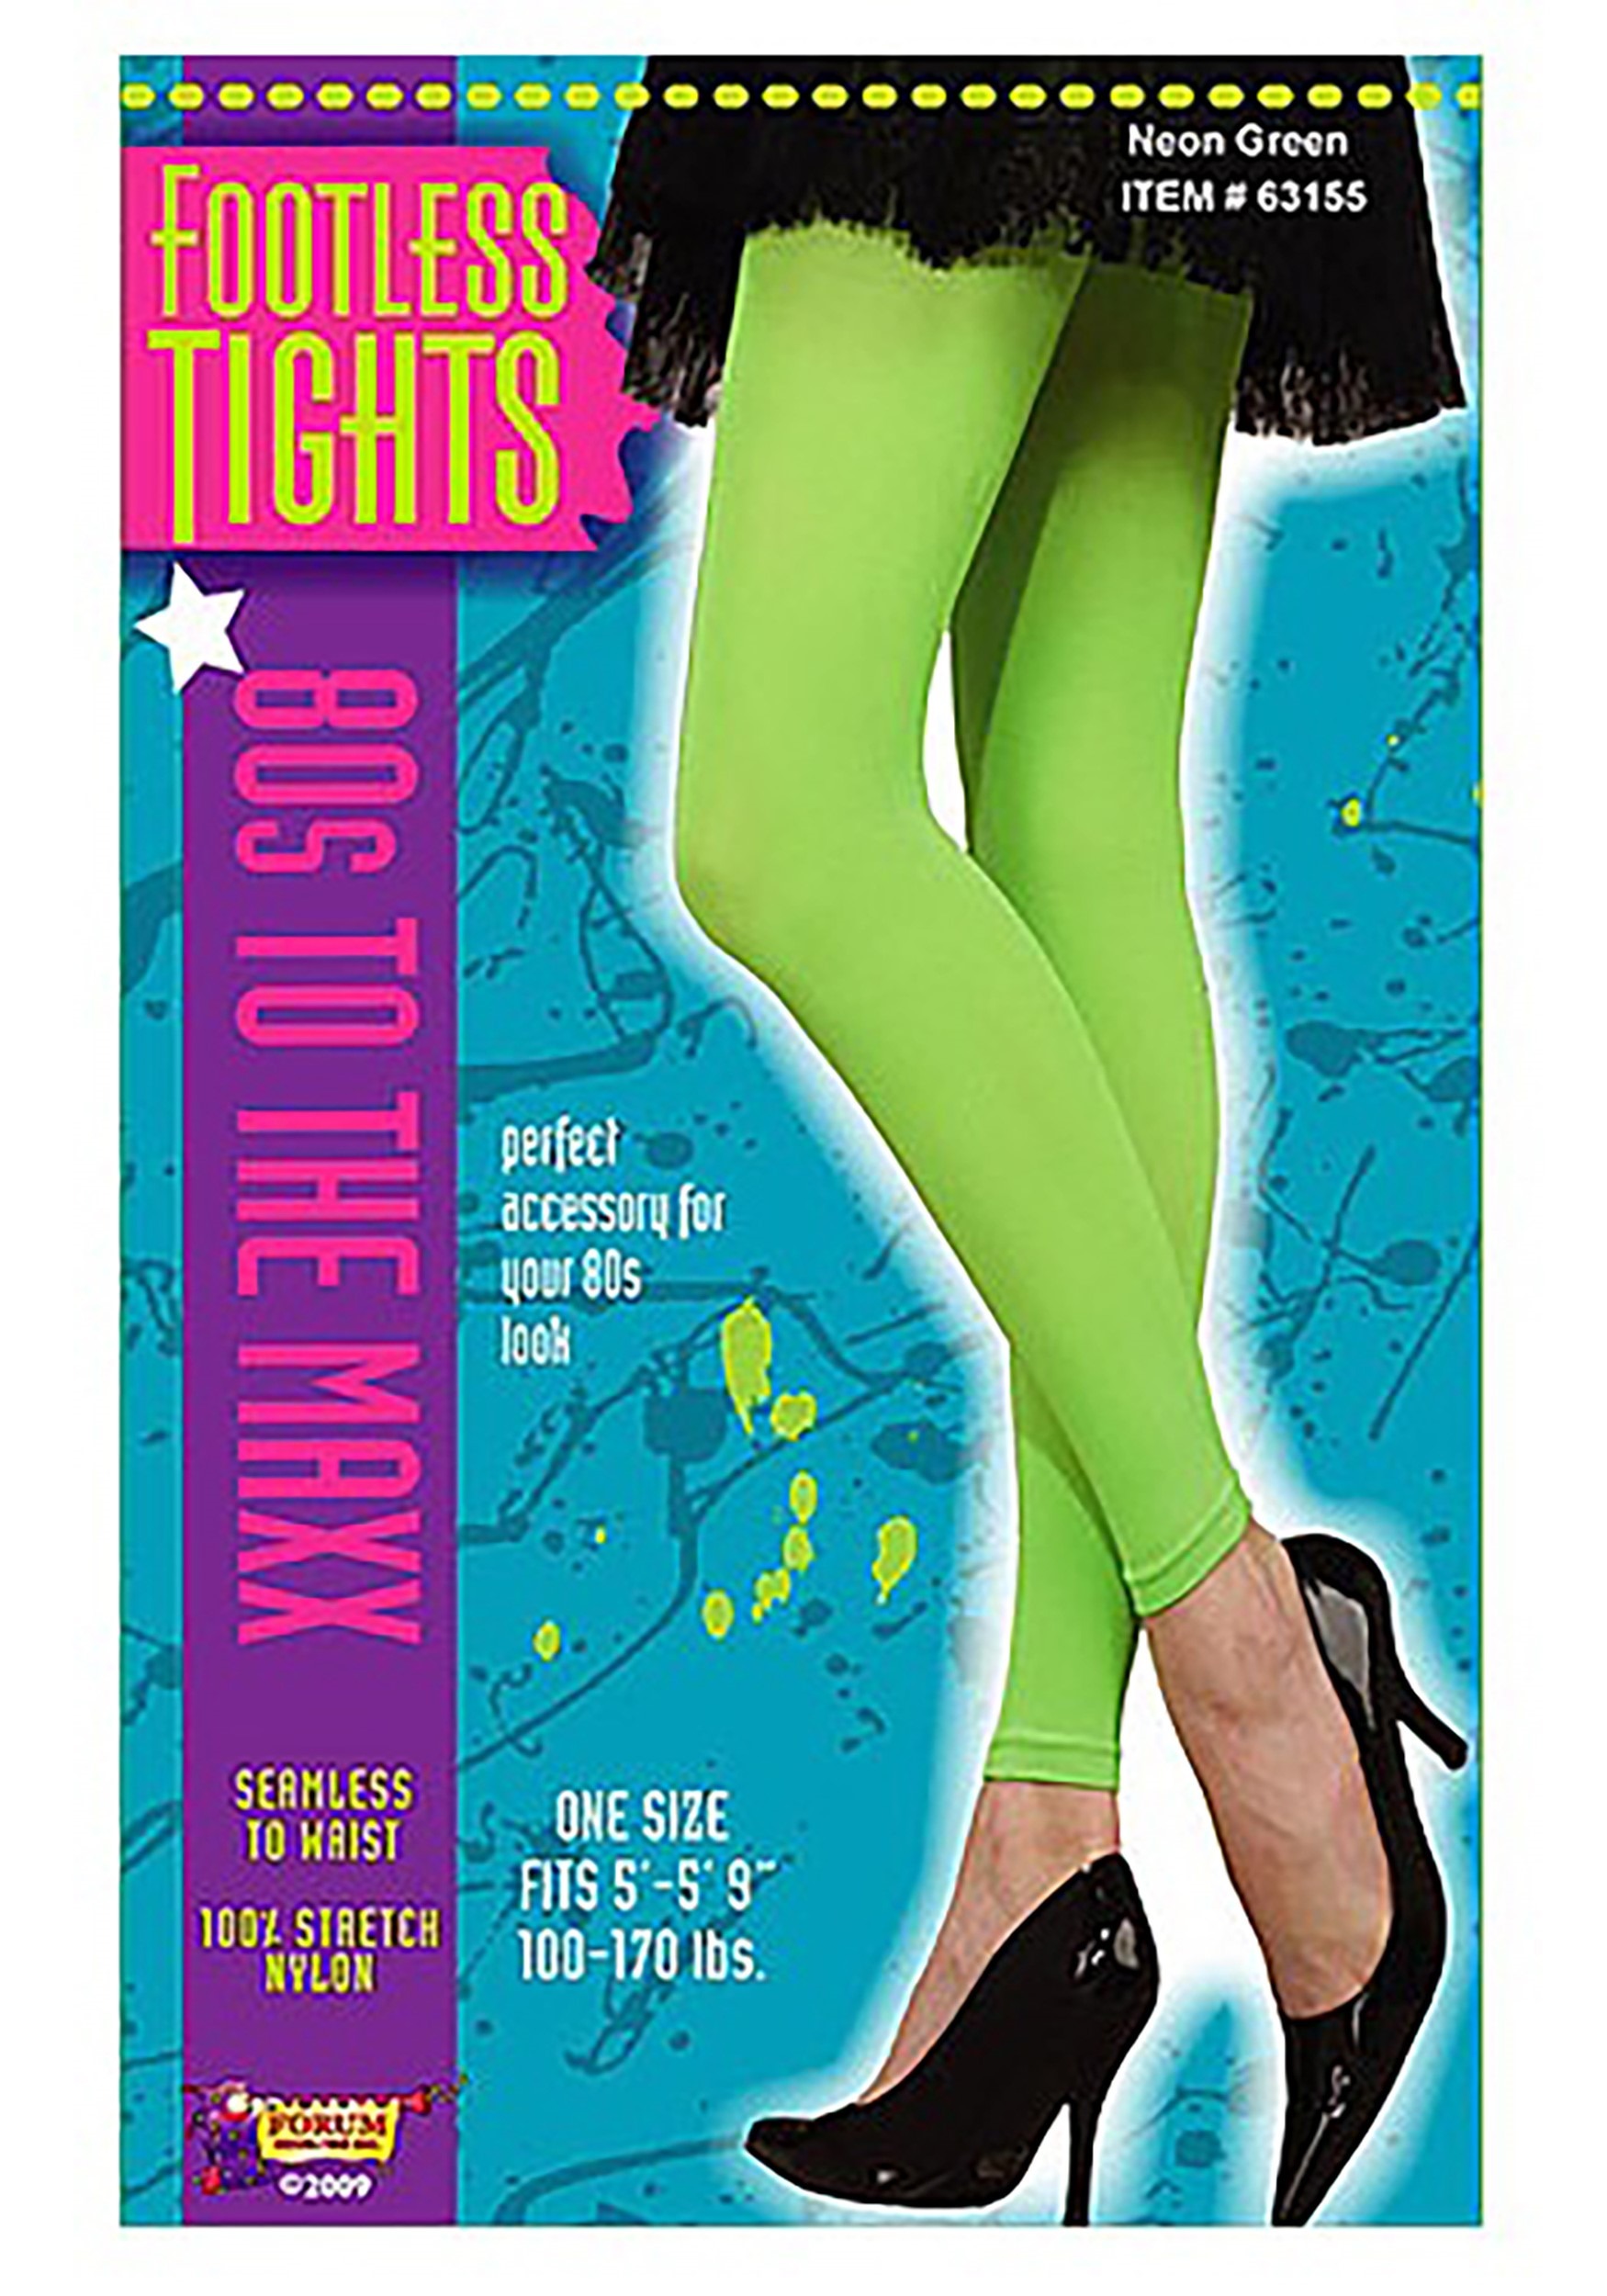 Footless Net Tights, Neon Pink